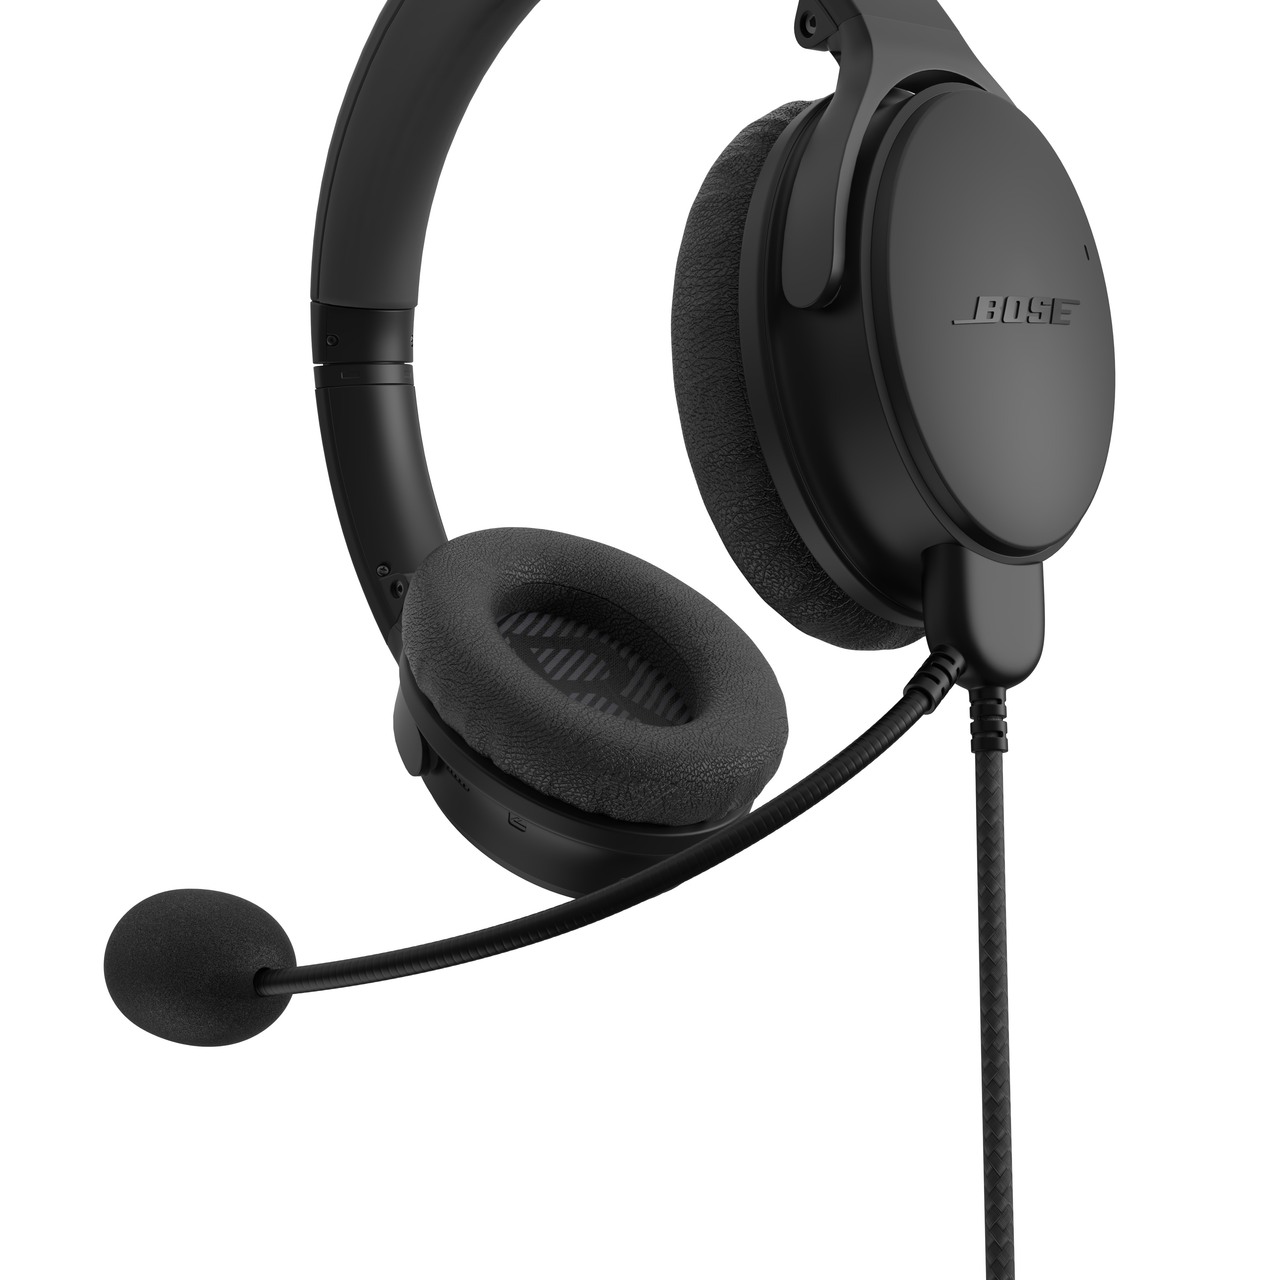 Headset Buddy CM3505 - ClearMic Noise-Cancelling Microphone for Bose QC35